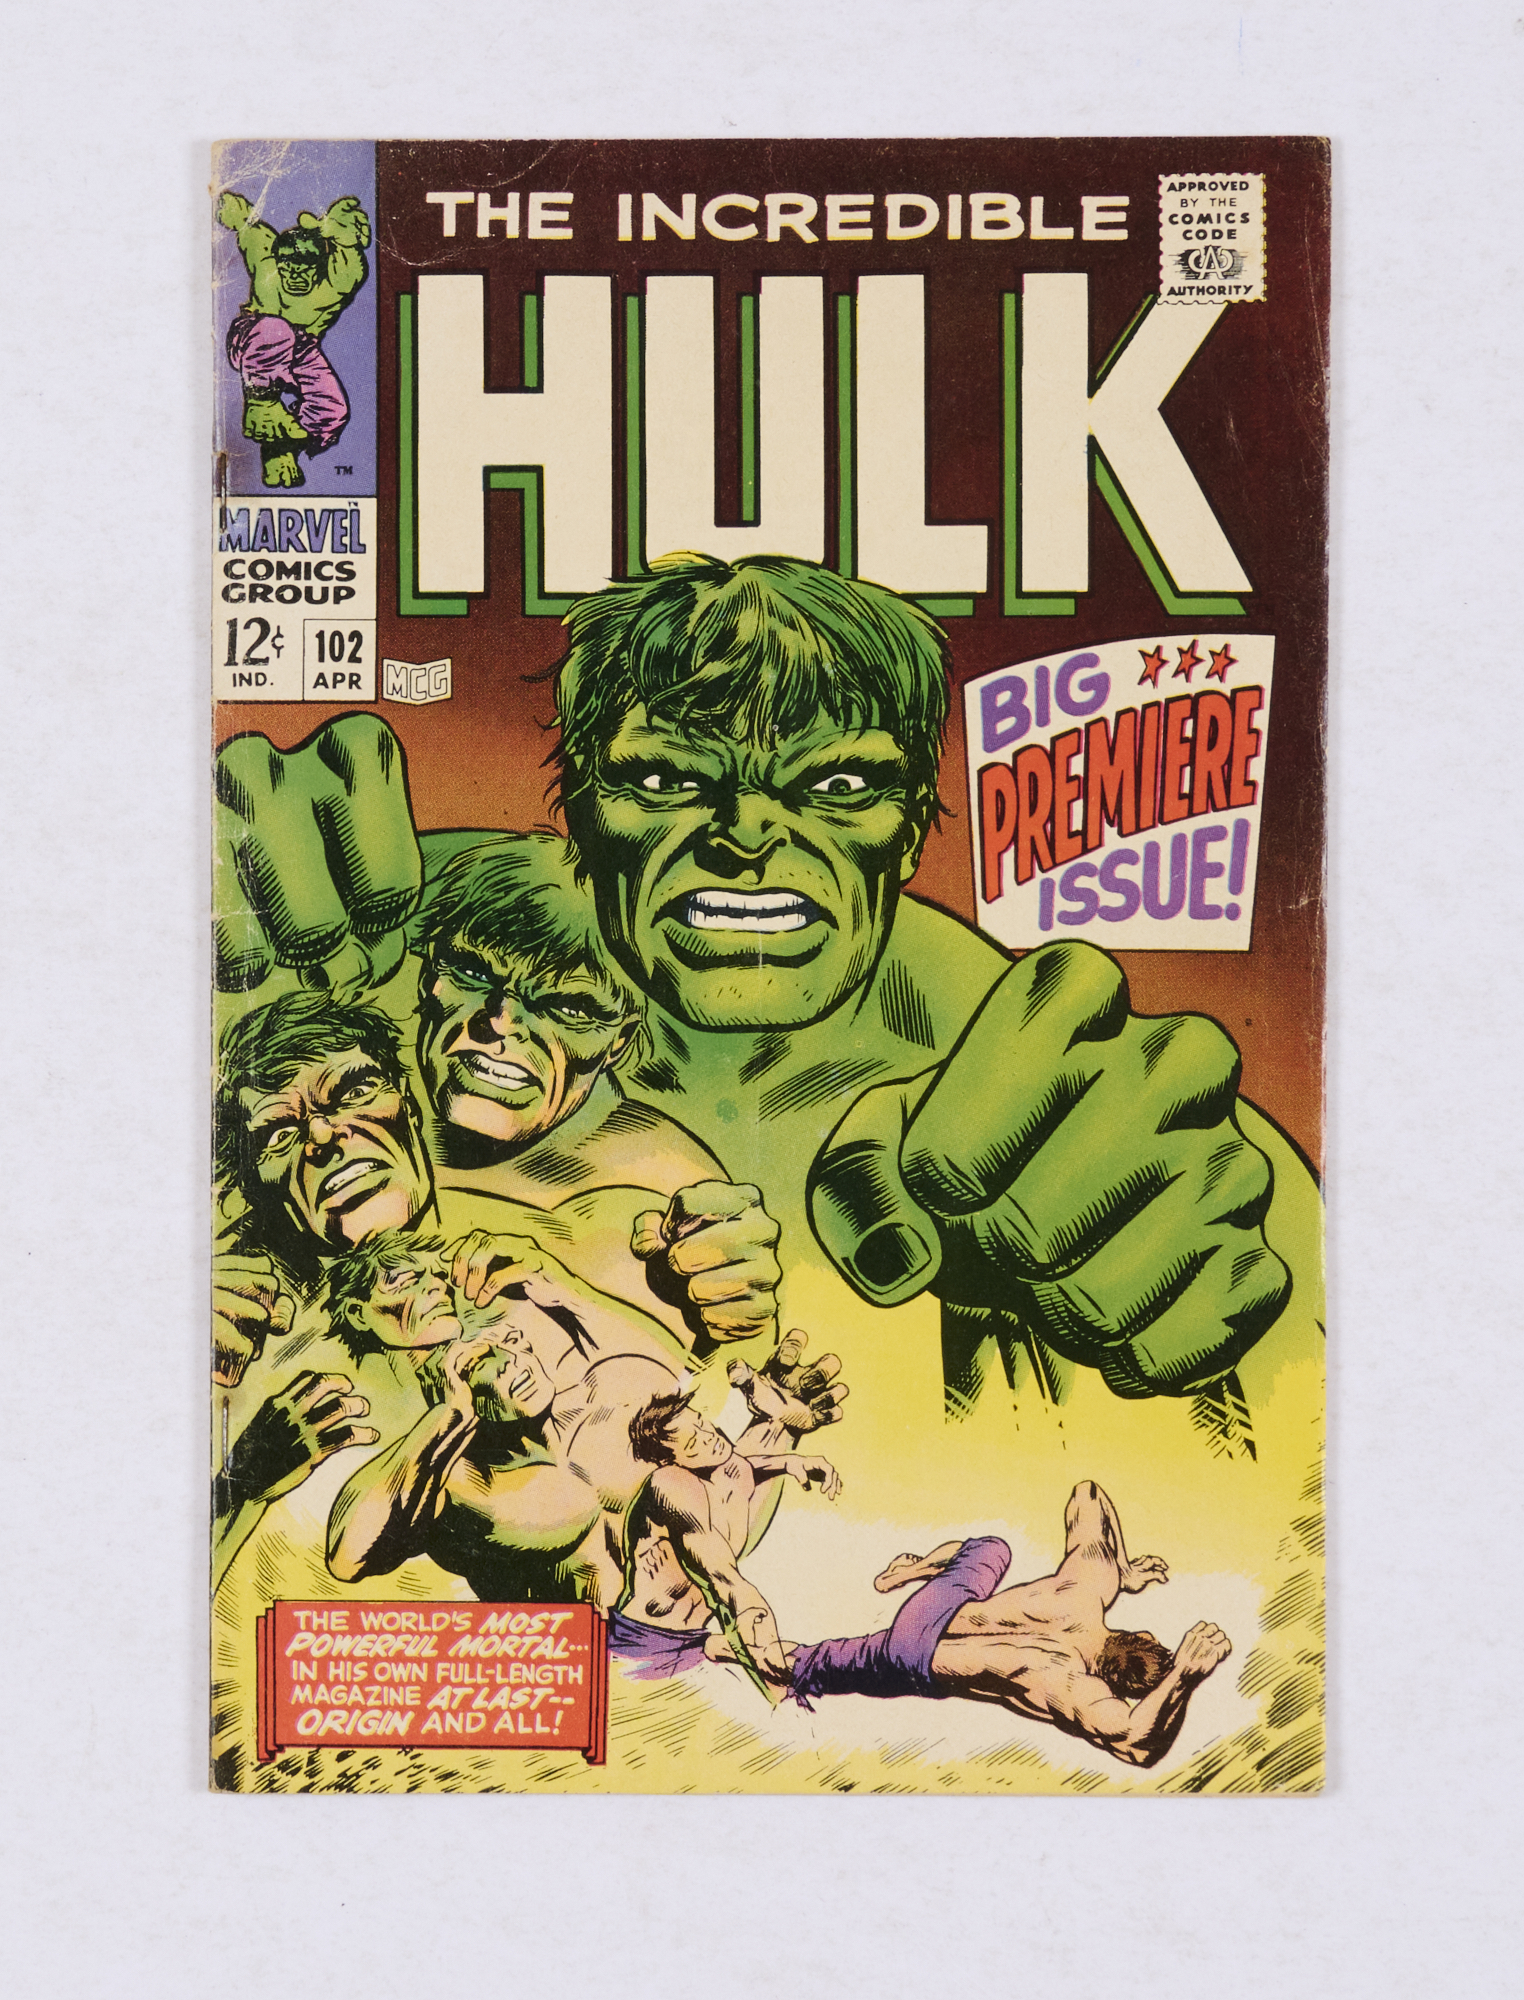 Incredible Hulk 102 (1968) Cents copy. Back cover has moisture staining by spine, migrating staple